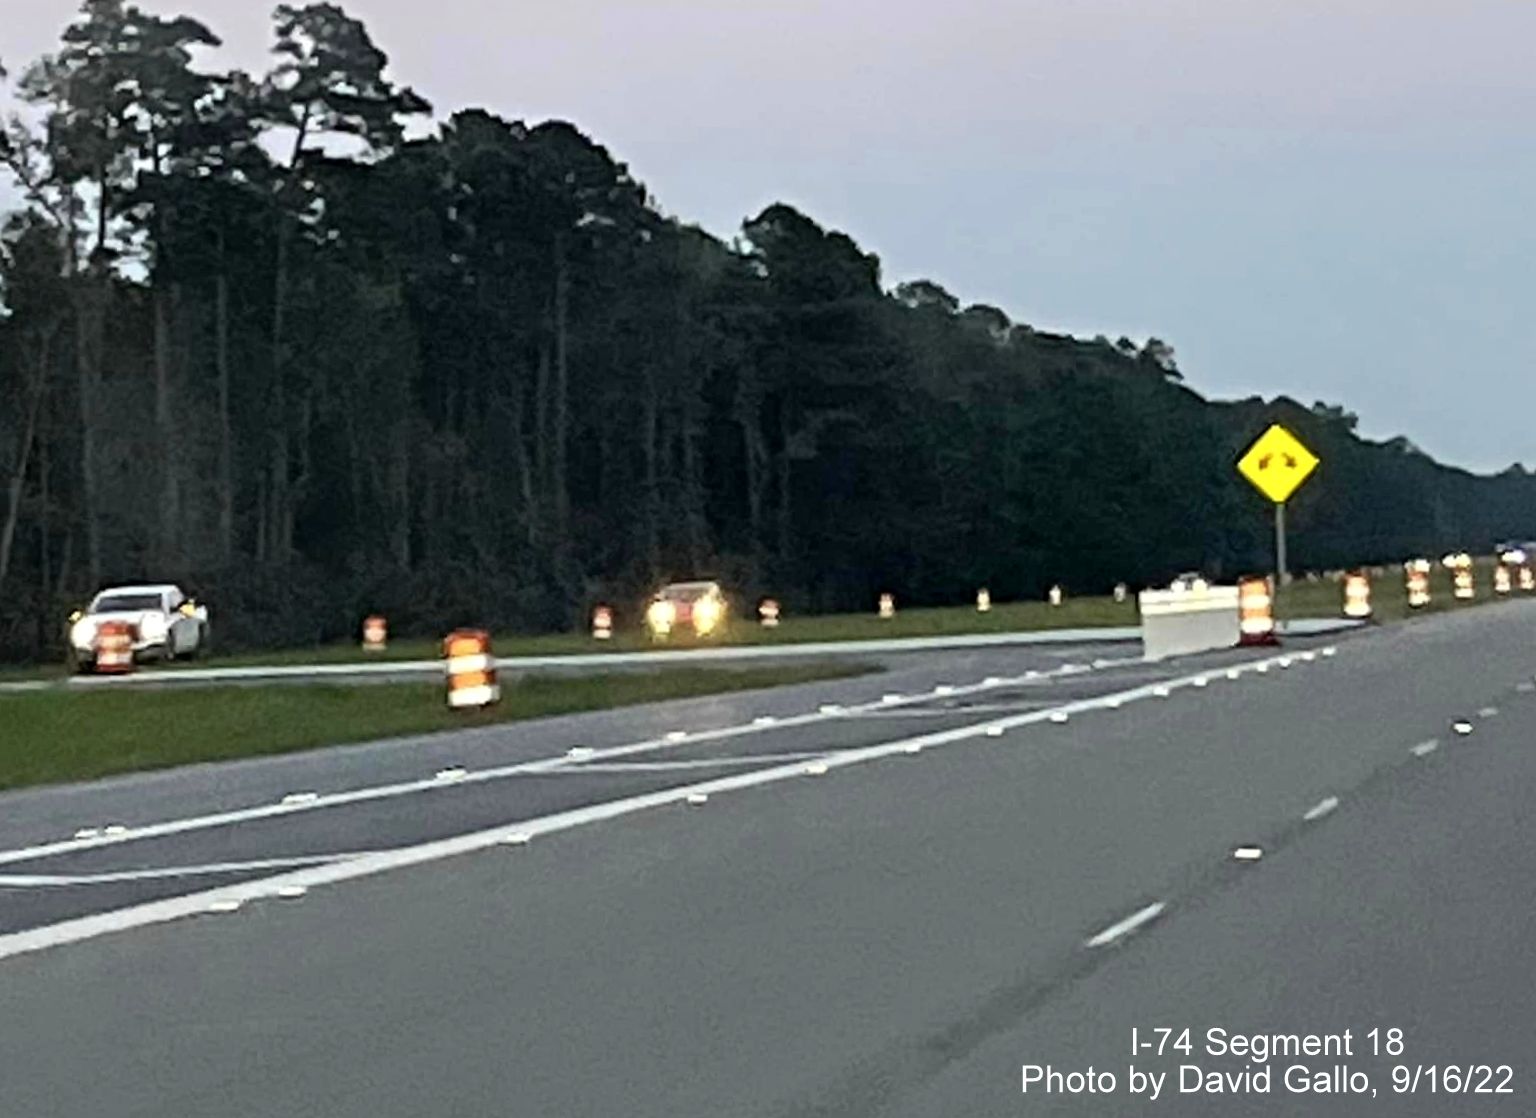 Image of trees cut down along US 74 West as part of new Lake Waccamaw interchange construction, by David Gallo, September 2022